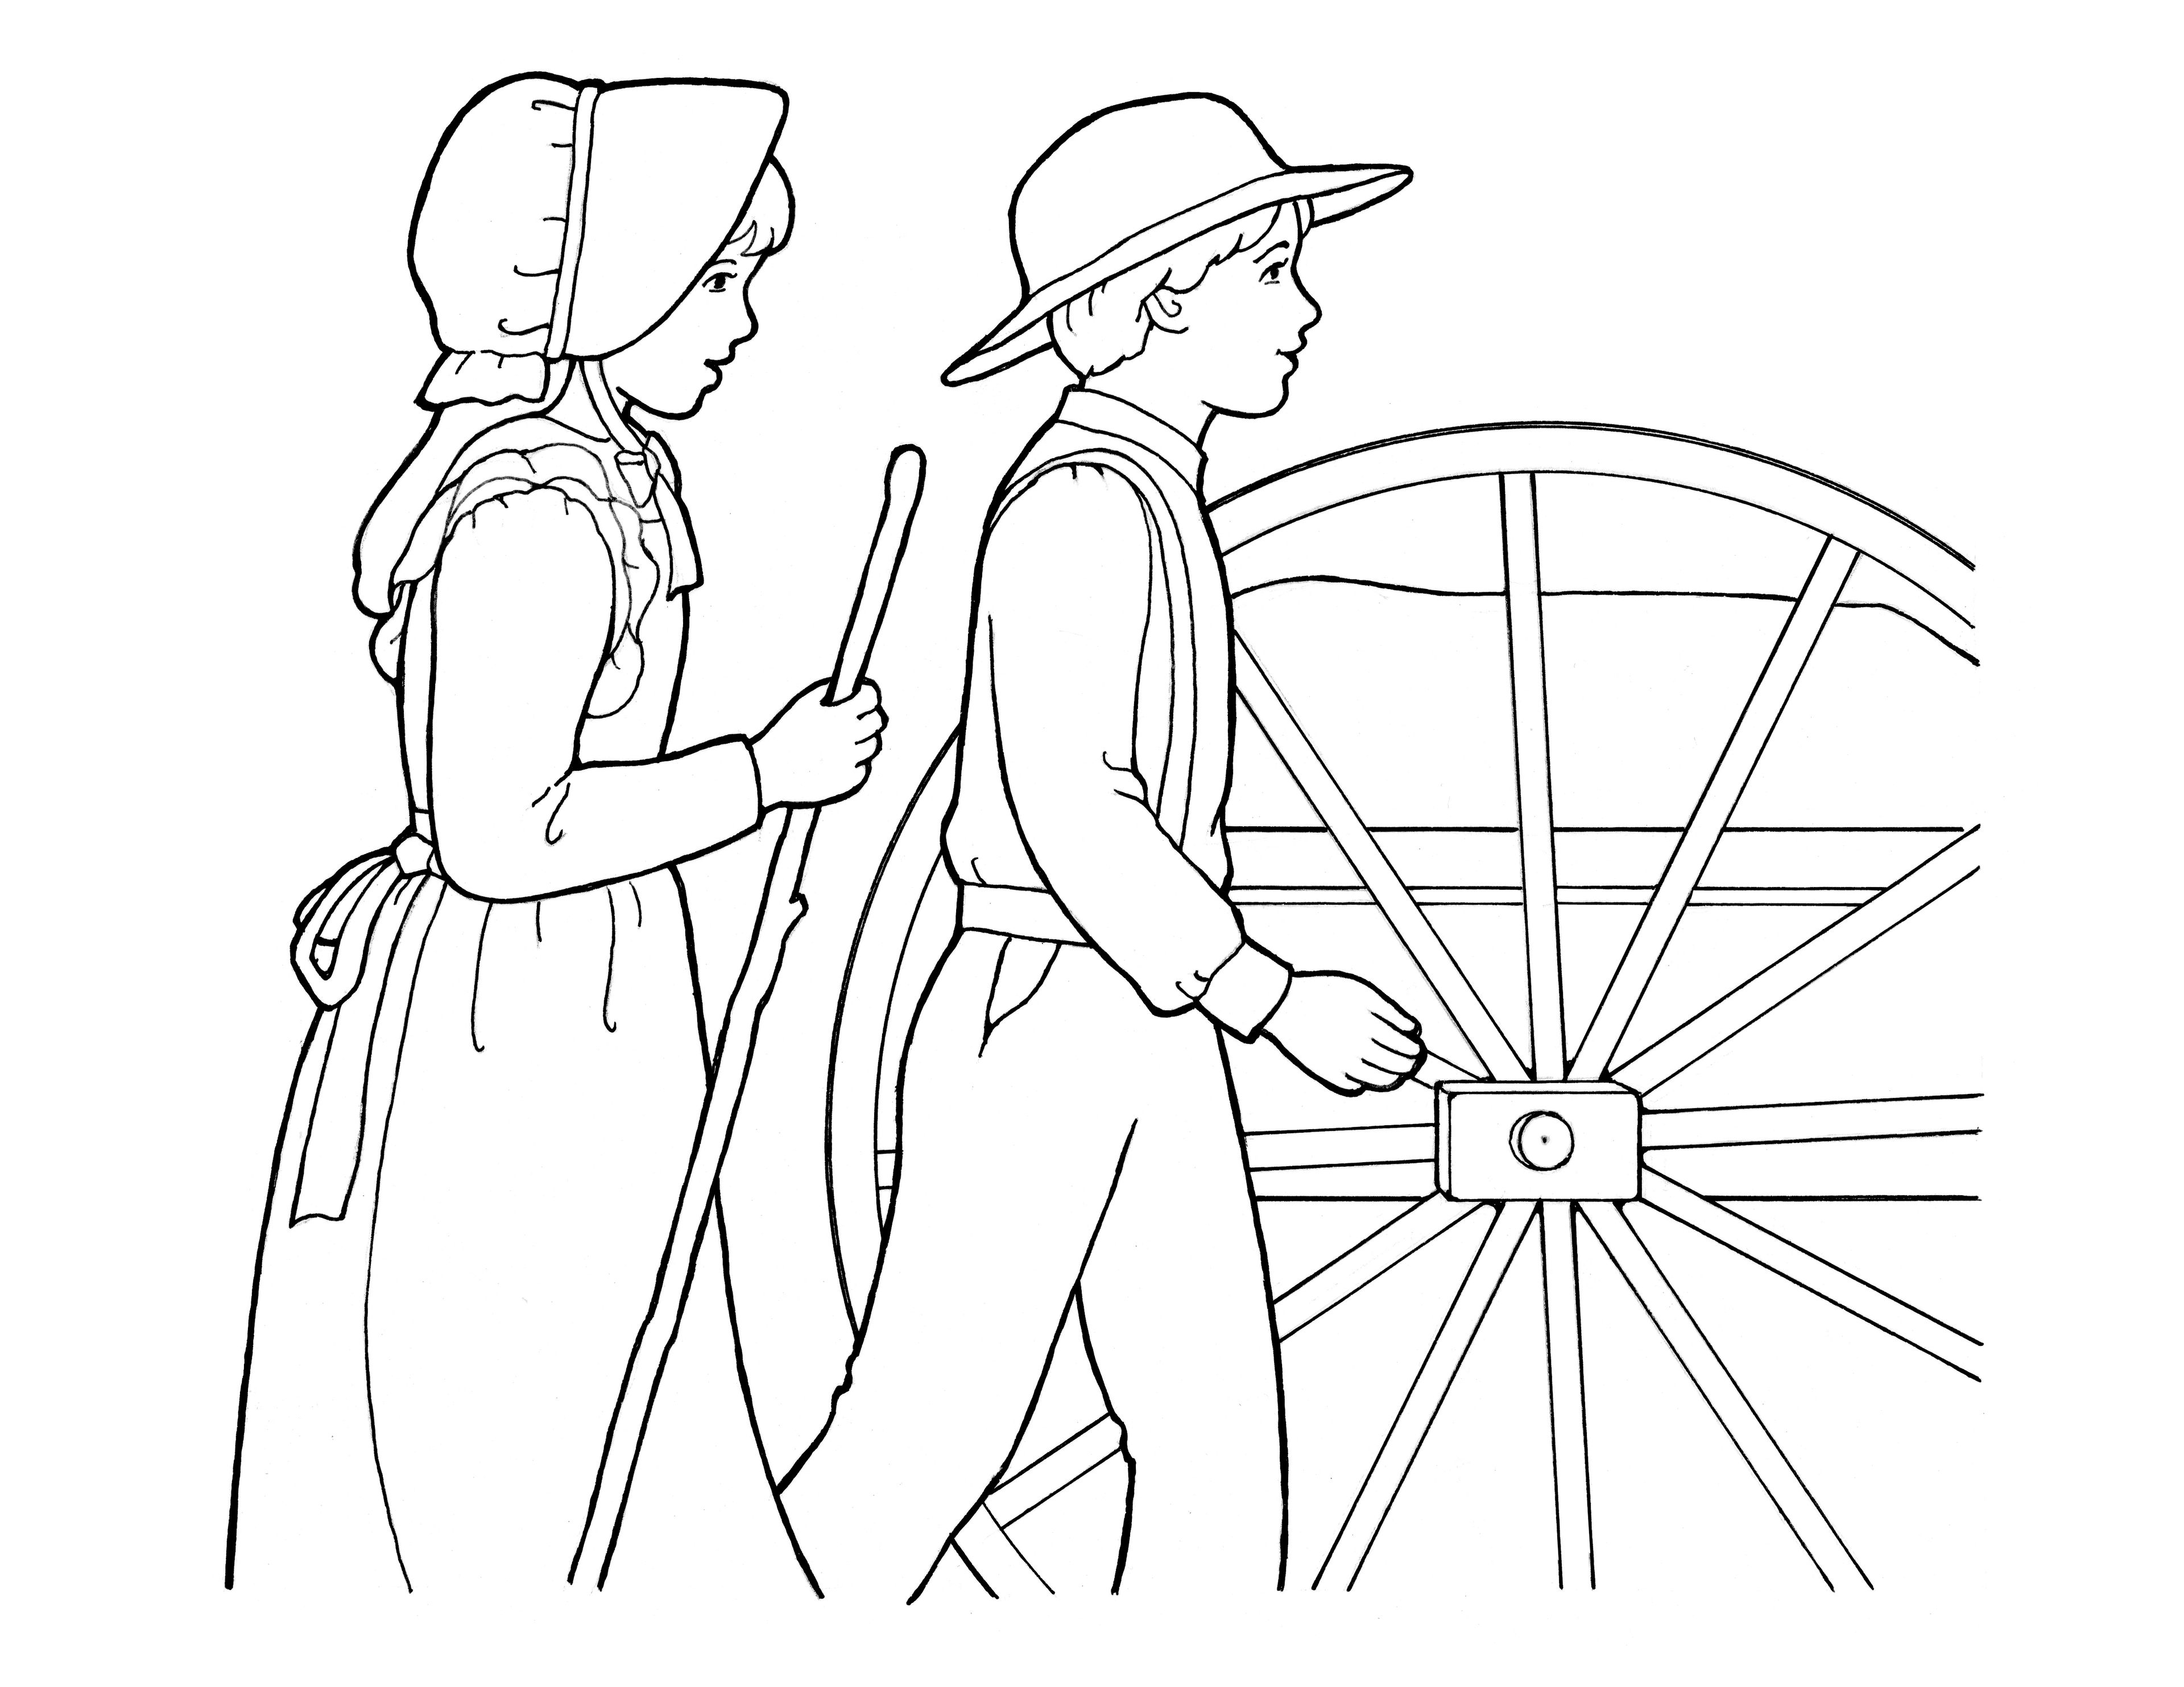 An illustration of a boy and girl pulling a handcart.